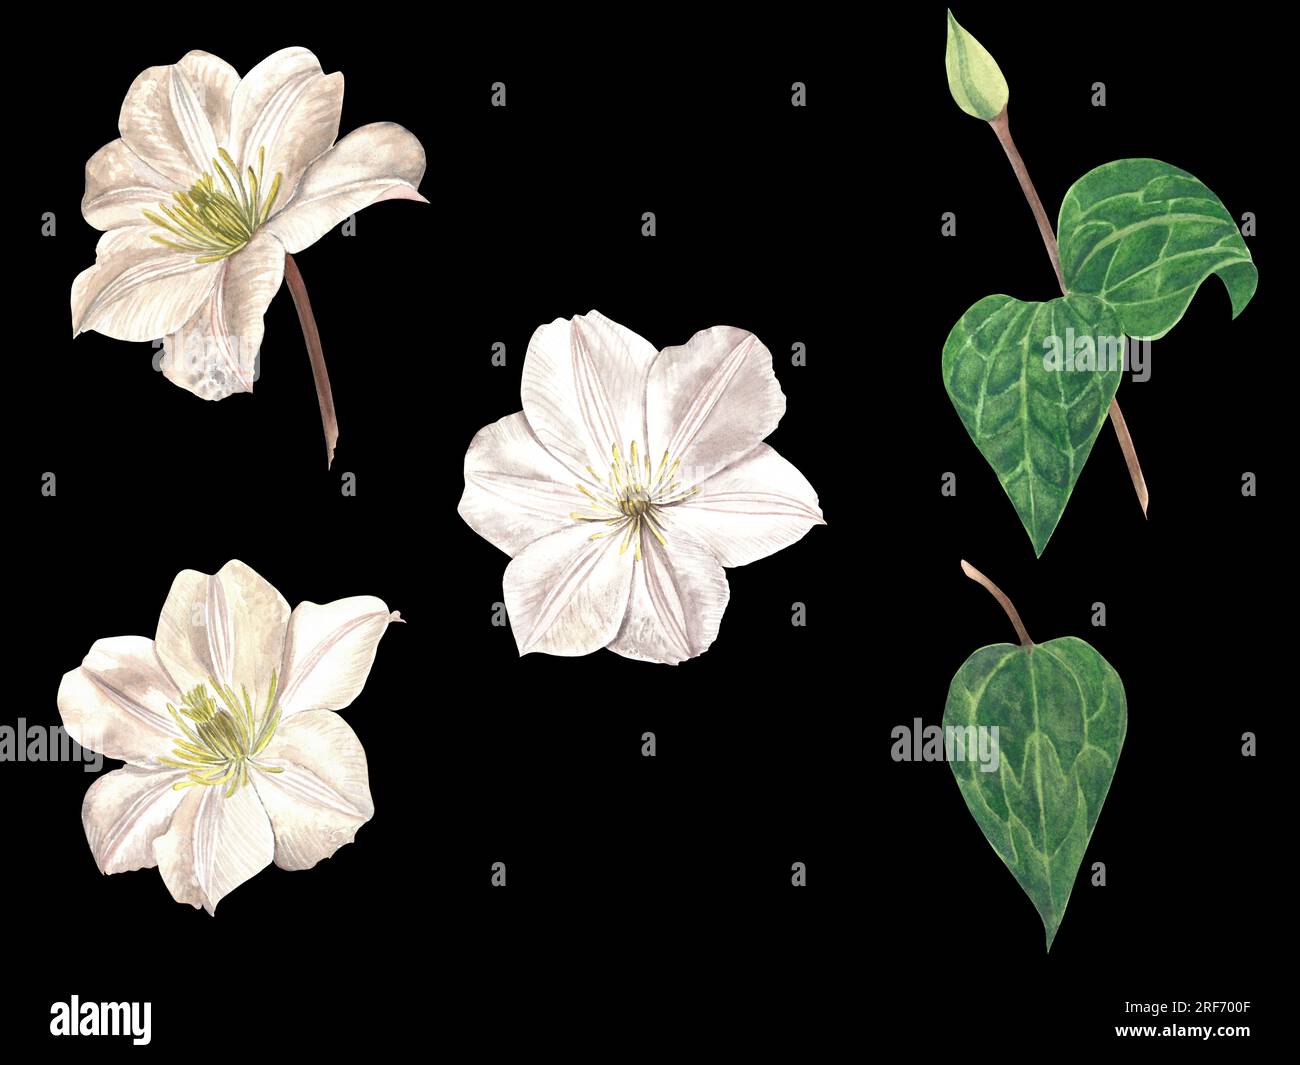 Watercolor illustration of clematis flowers. Set of flowers and leaves on a black background, made by hand Stock Photo